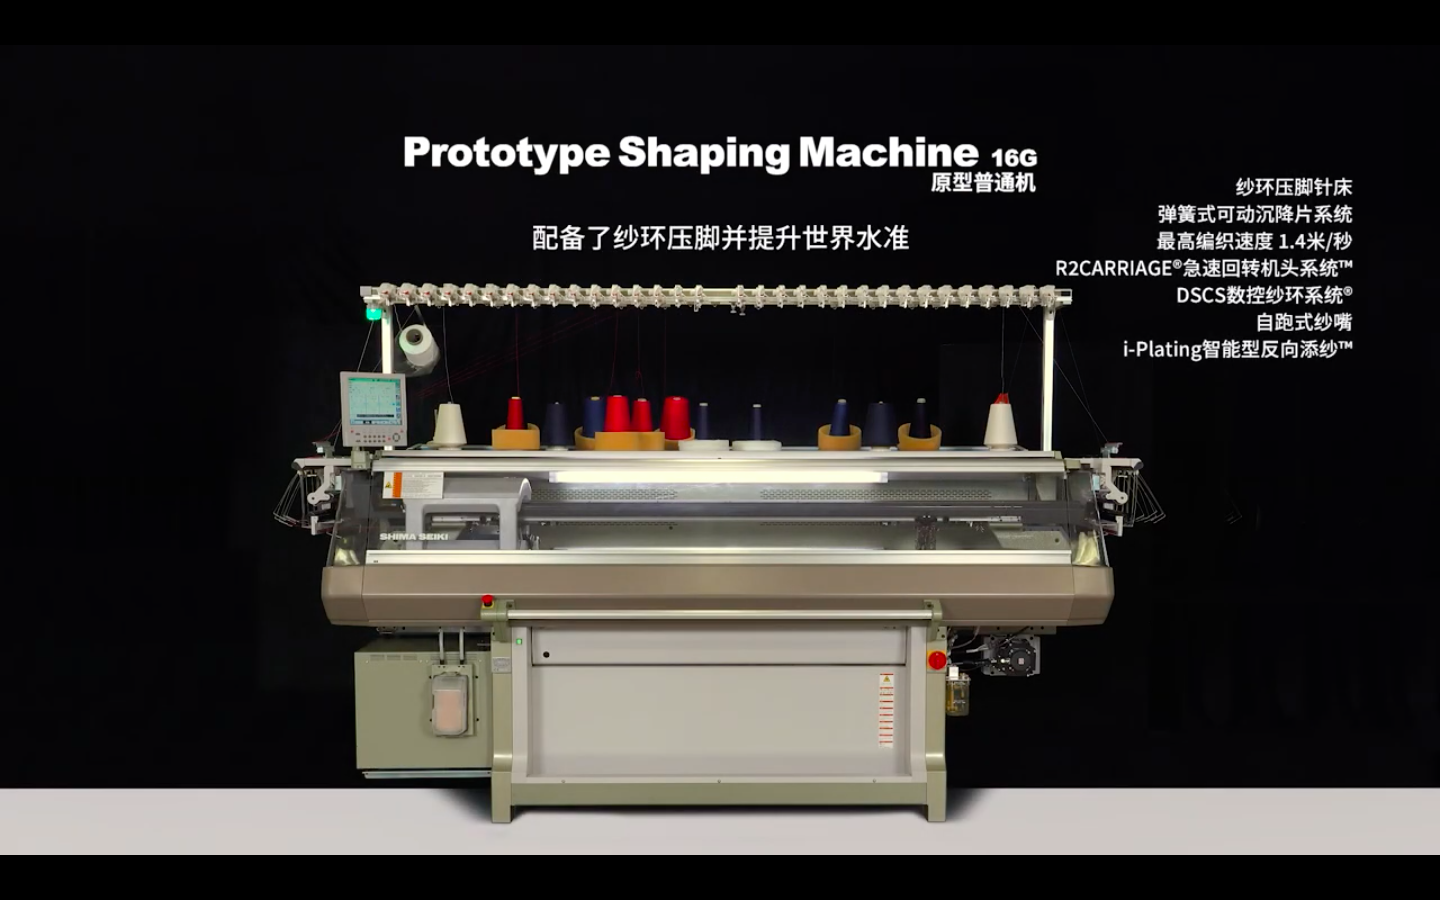 Shima’s16G Prototype shaping machine possesses loop presser bed, spring-type movable sinker system and is equipped with loop pressers and improved knitting speed of 1.4 m/s. © Stephanie Lawson